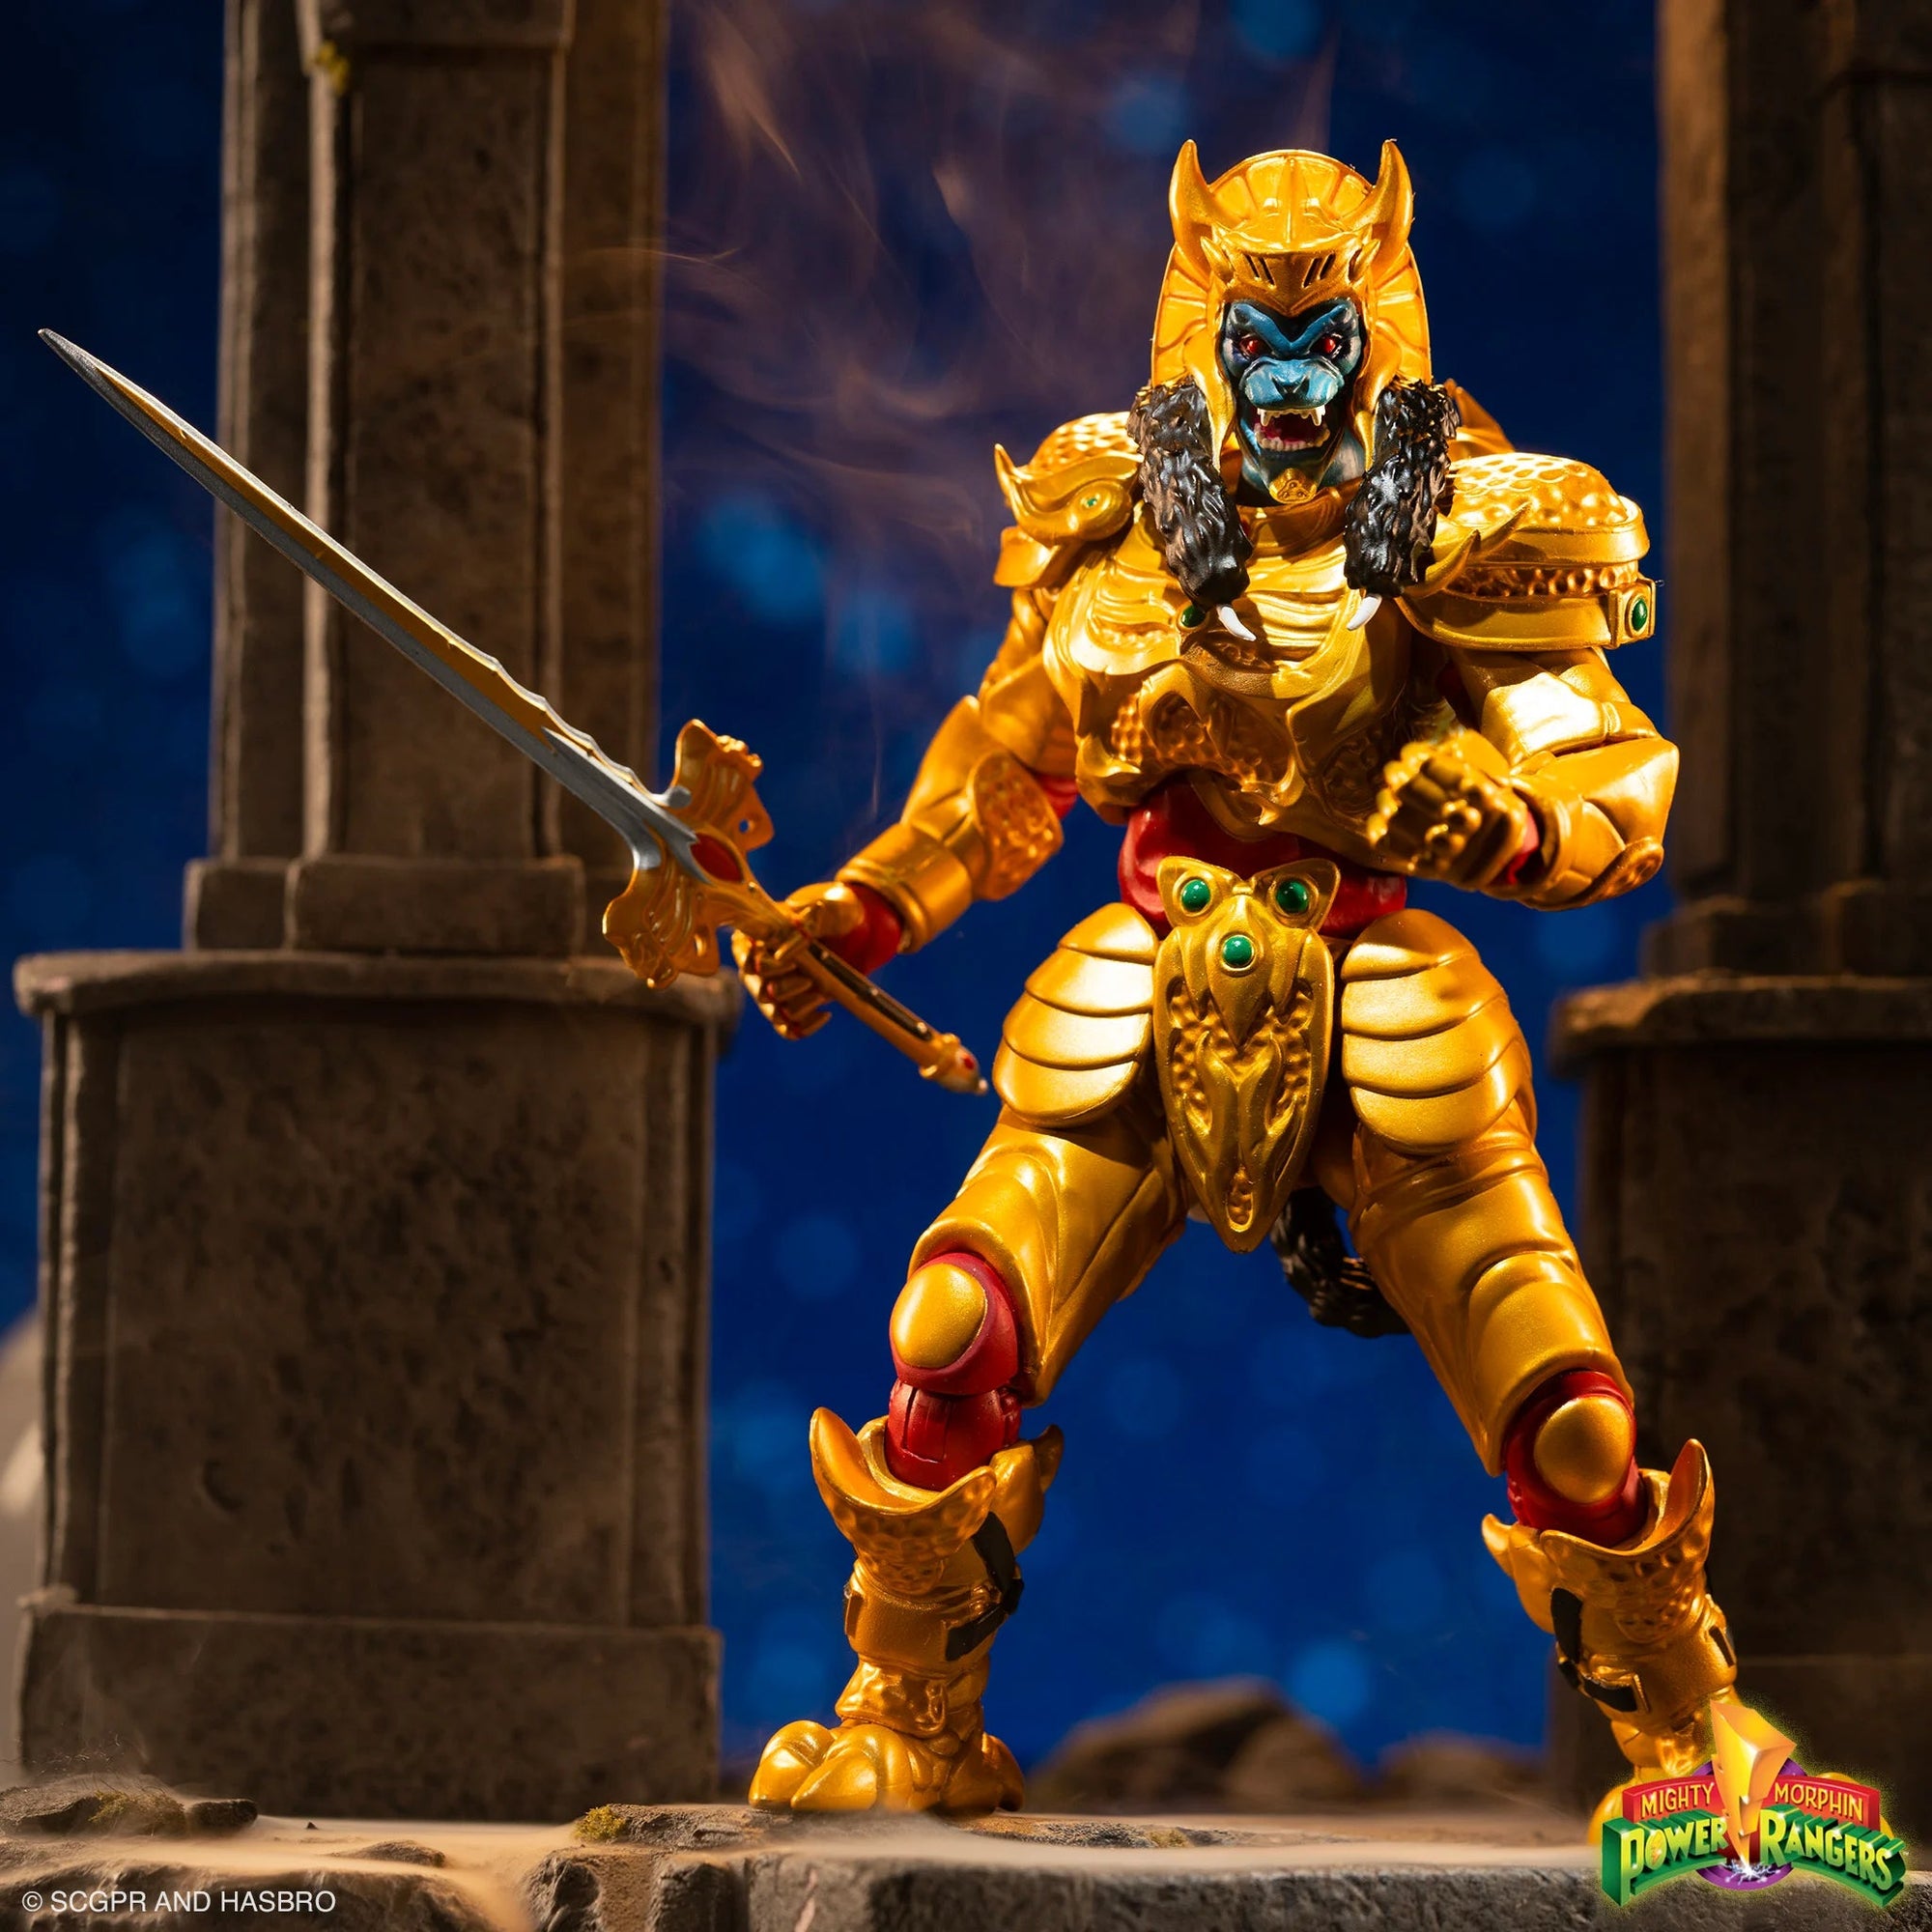 Goldar - Mighty Morphin Power Rangers Wave 1 - ULTIMATES! Figure by Super7